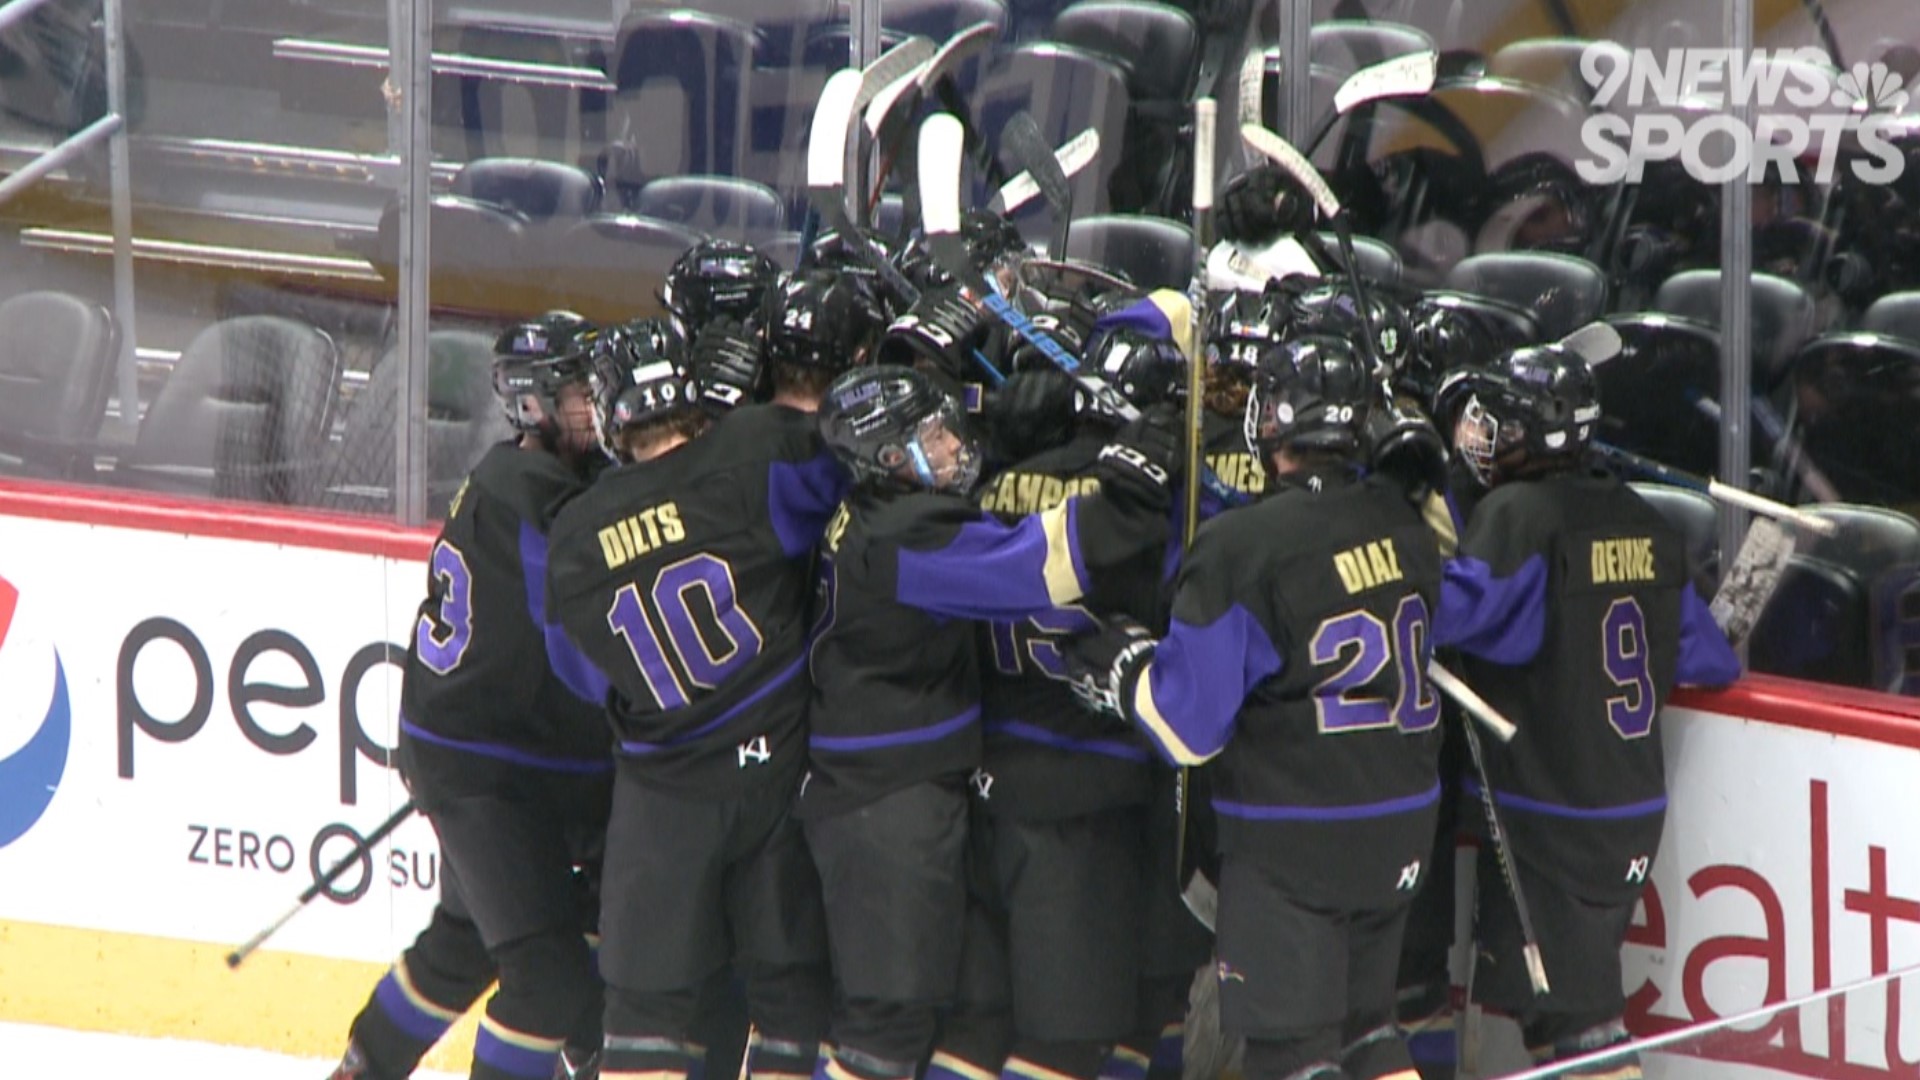 The Lambkins won 3-2 over the Wolverines to advance to the state championship game.